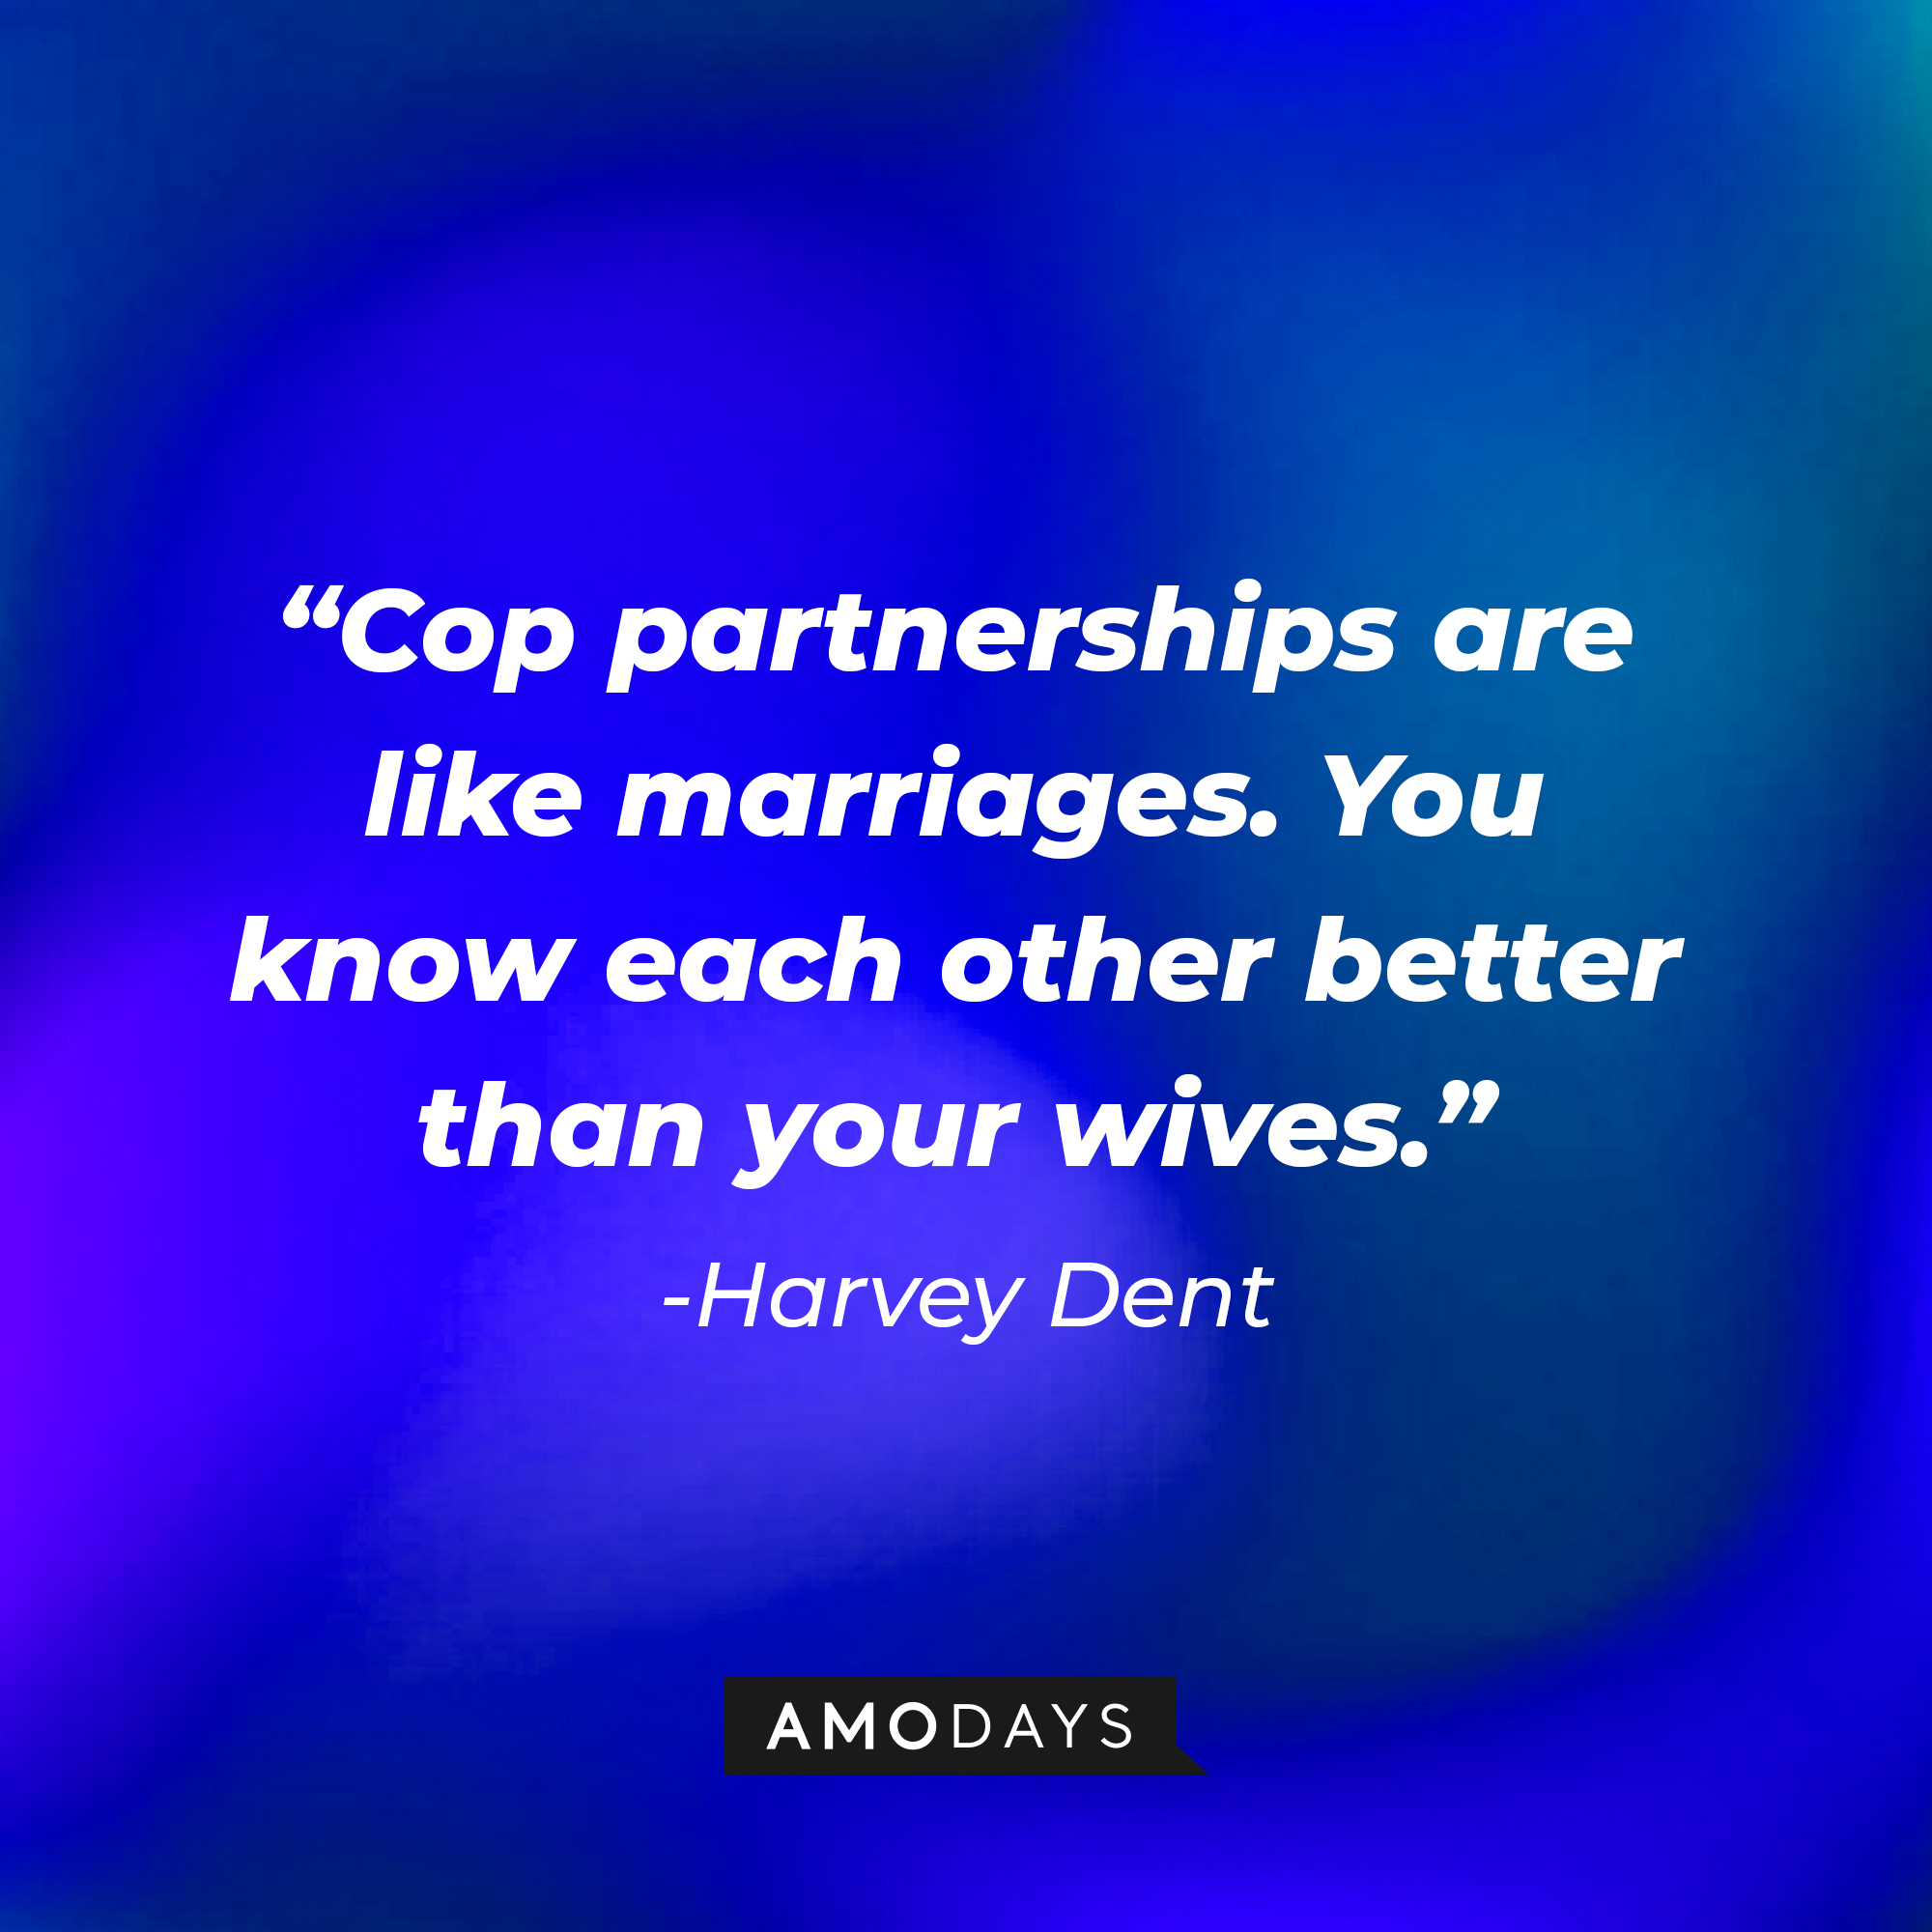 Harvey Dent's quote: “Cop partnerships are like marriages. You know each other better than your wives.” | Source: Amodays